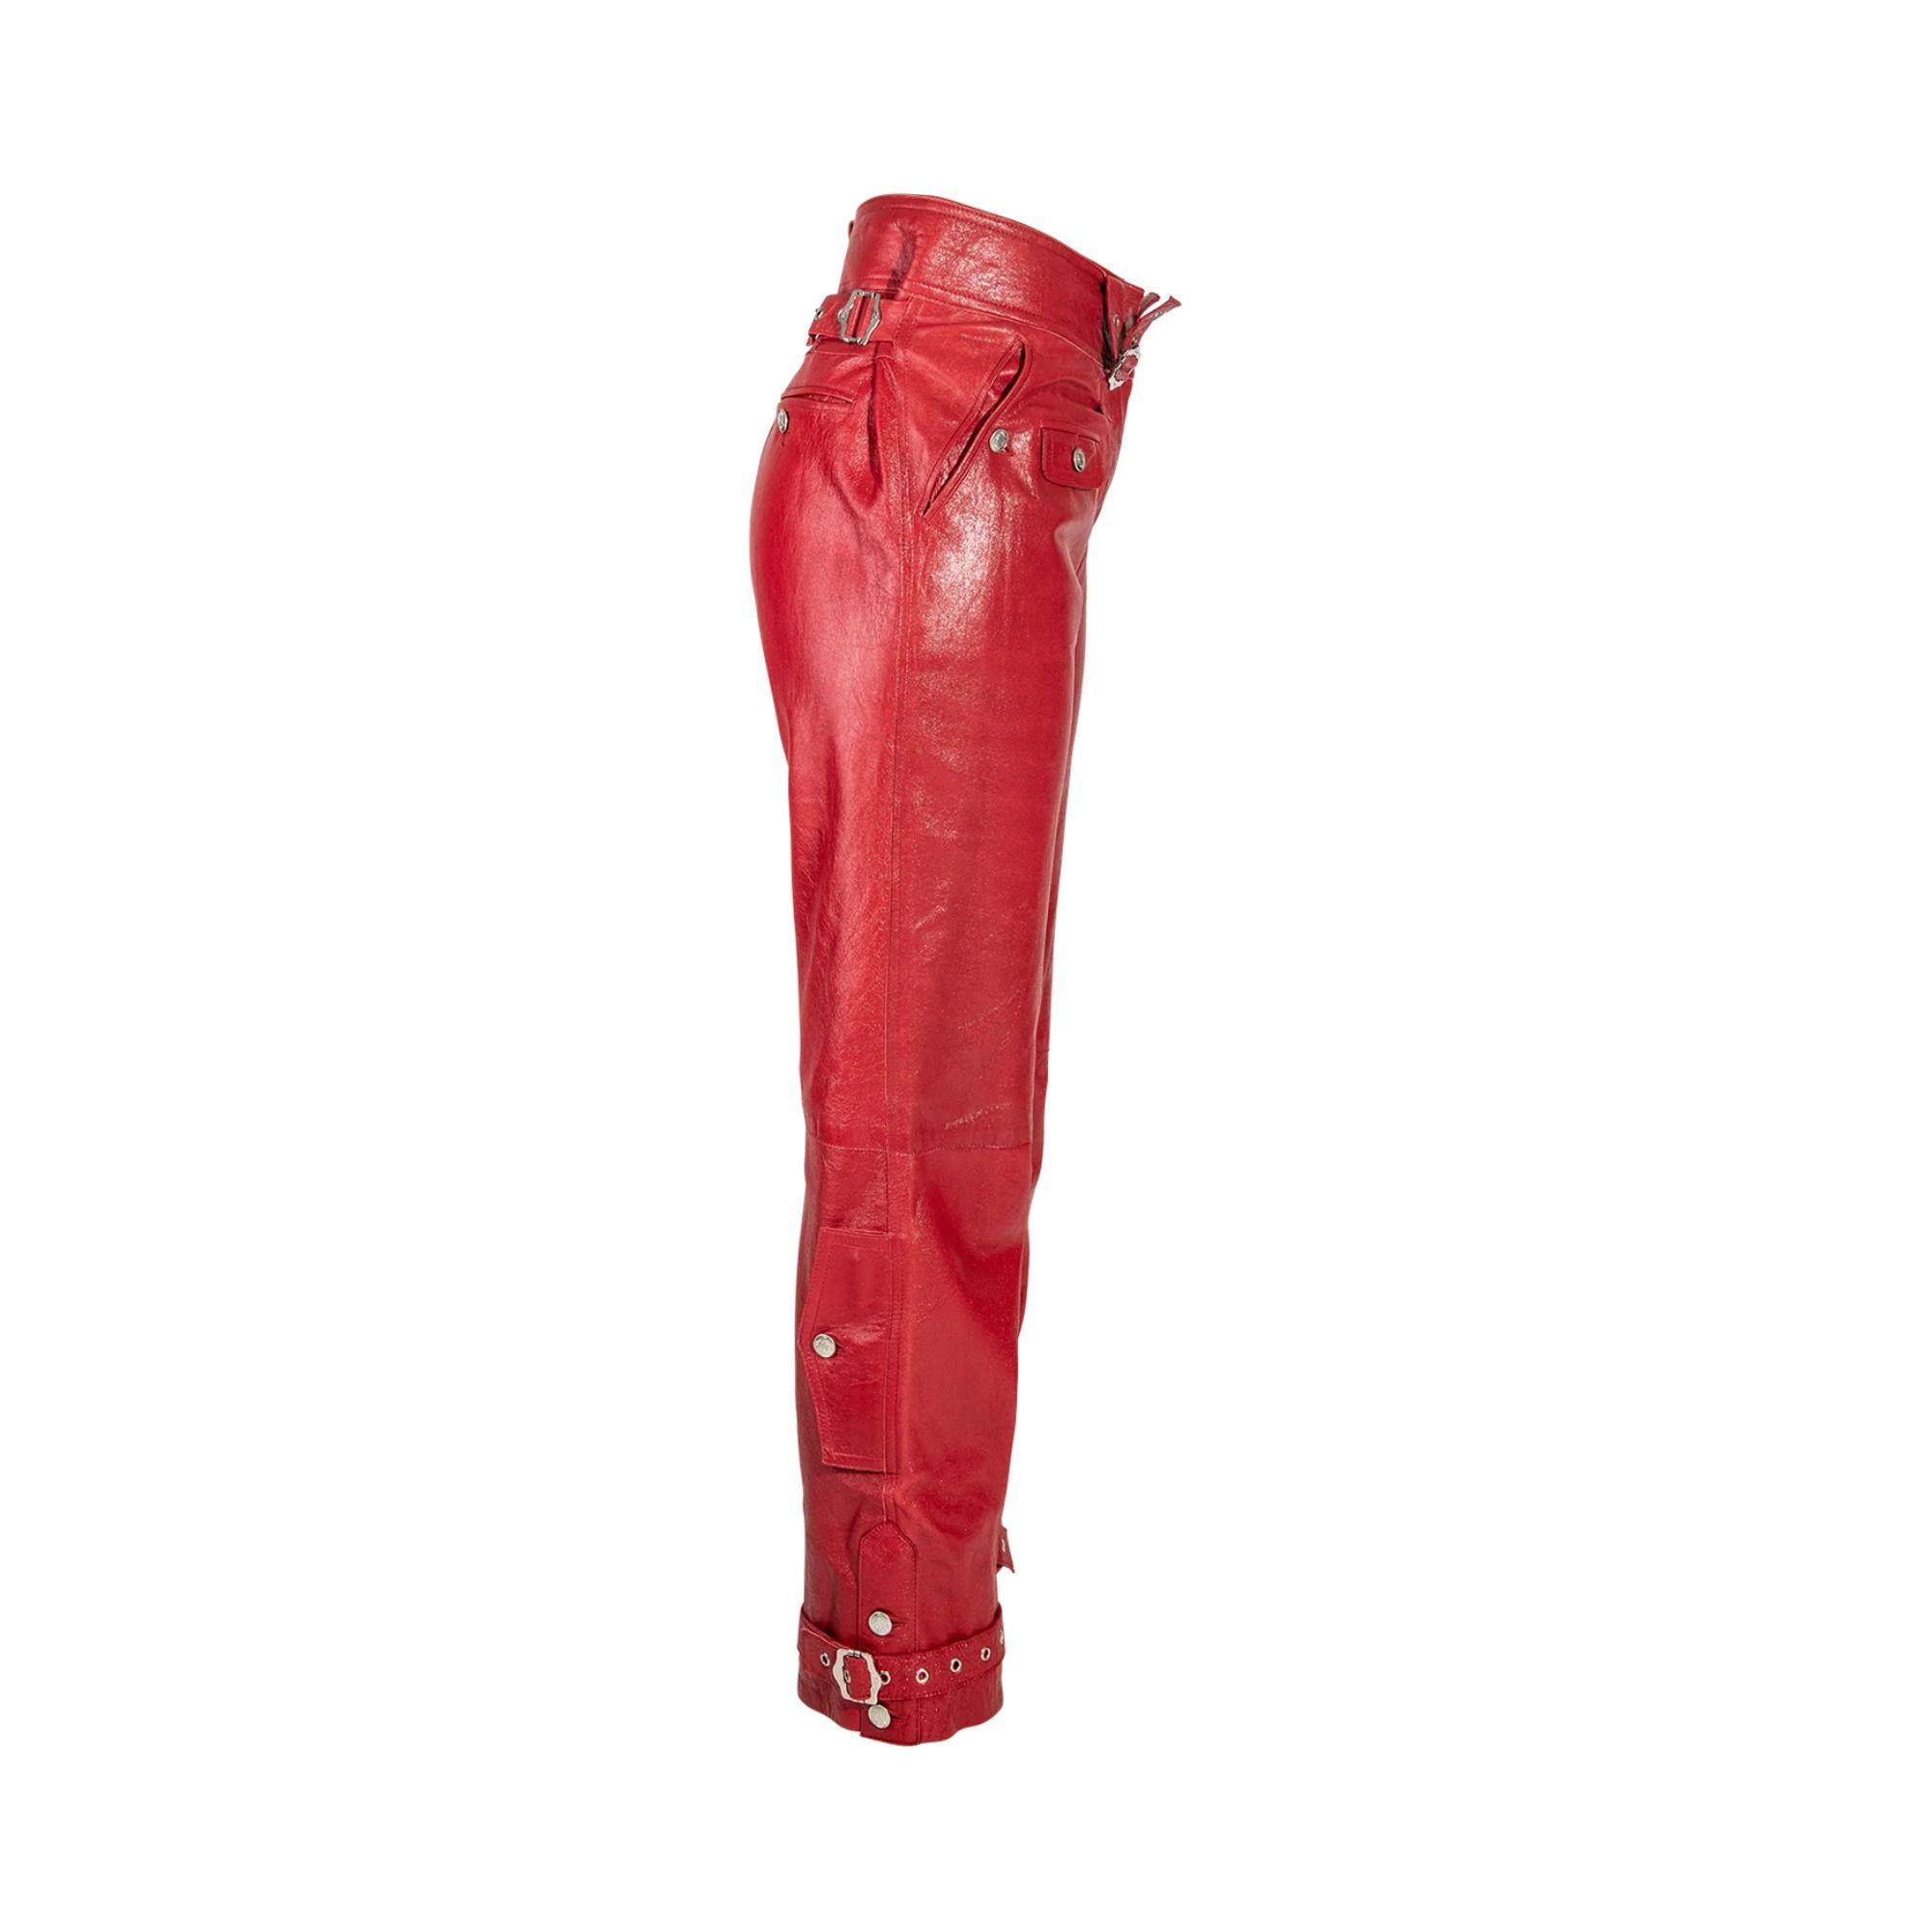 A/W 2003 Christian Dior by Galliano ‘Hard Core’ collection mid-rise red leather pants with silver details. Features silver buckle details at waist, small flap pockets and adjustable silver buckle straps around ankles. 100% Lambskin leather with 95%